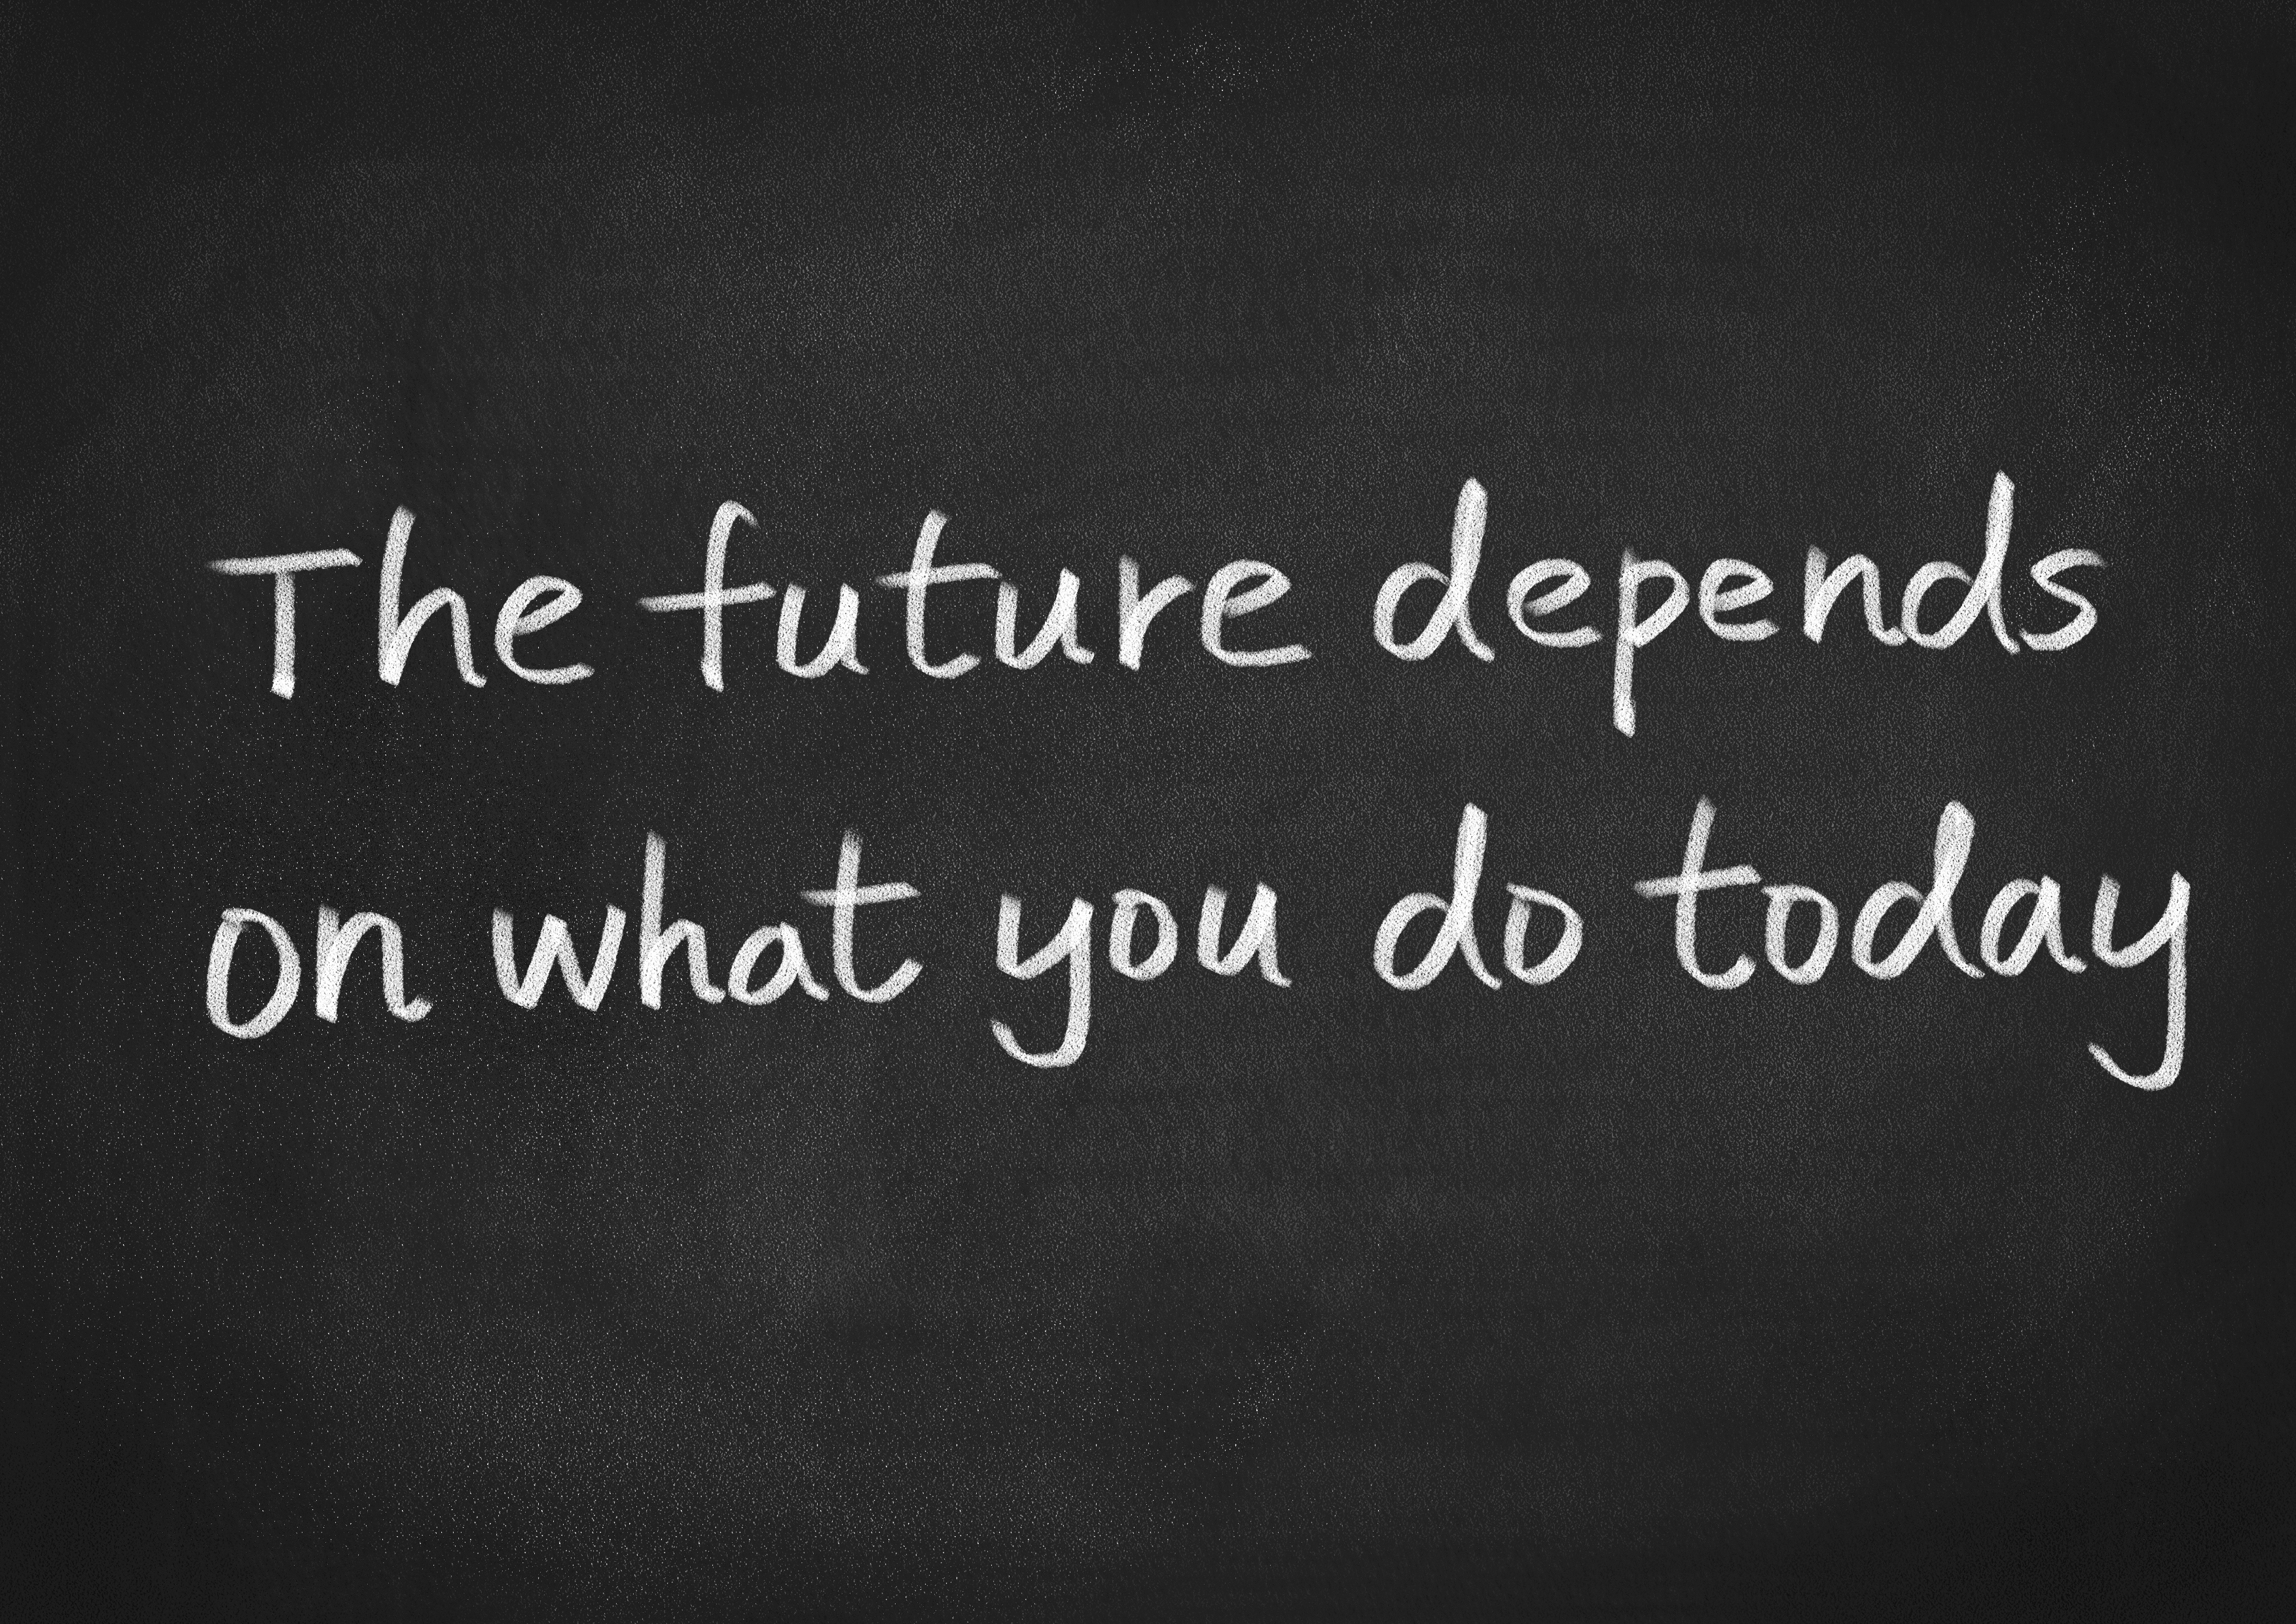 The future depends on what you do today words on a chalkboard background